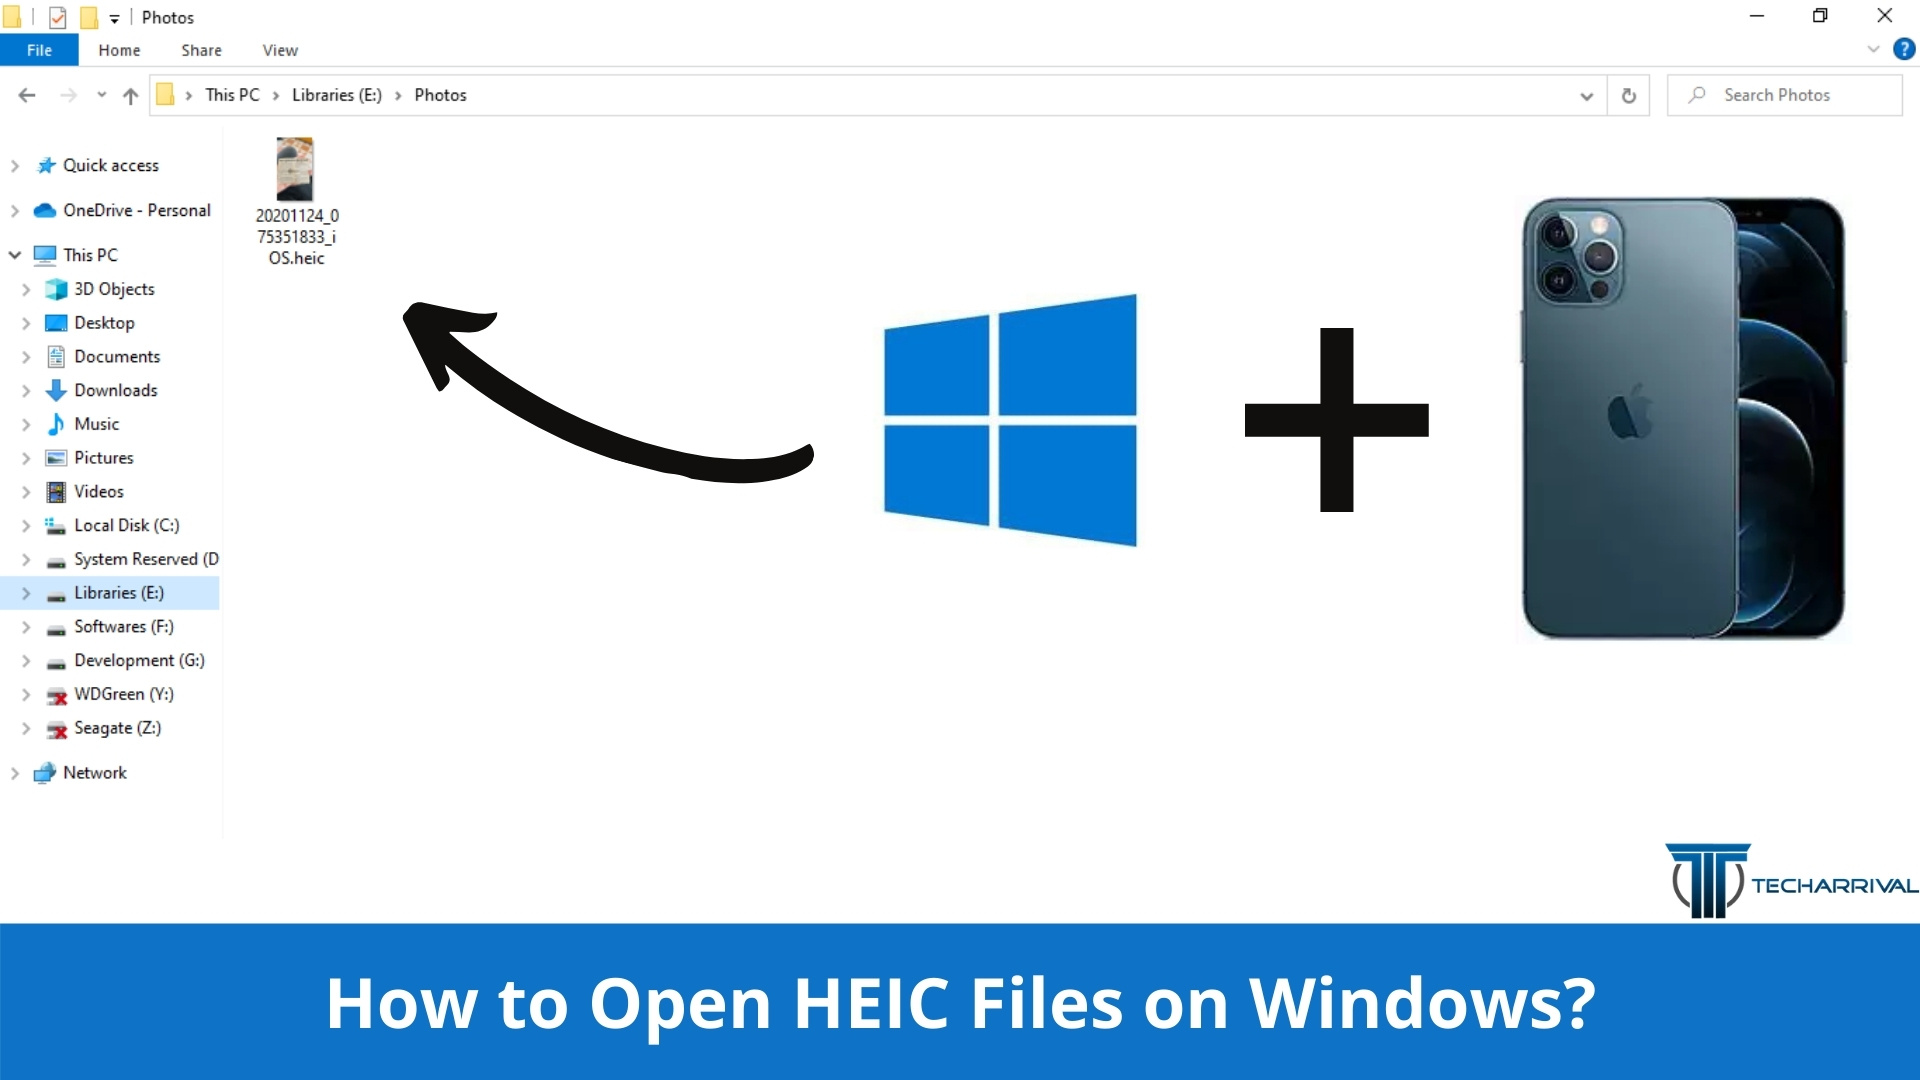 How to Open HEIC Files on Windows?